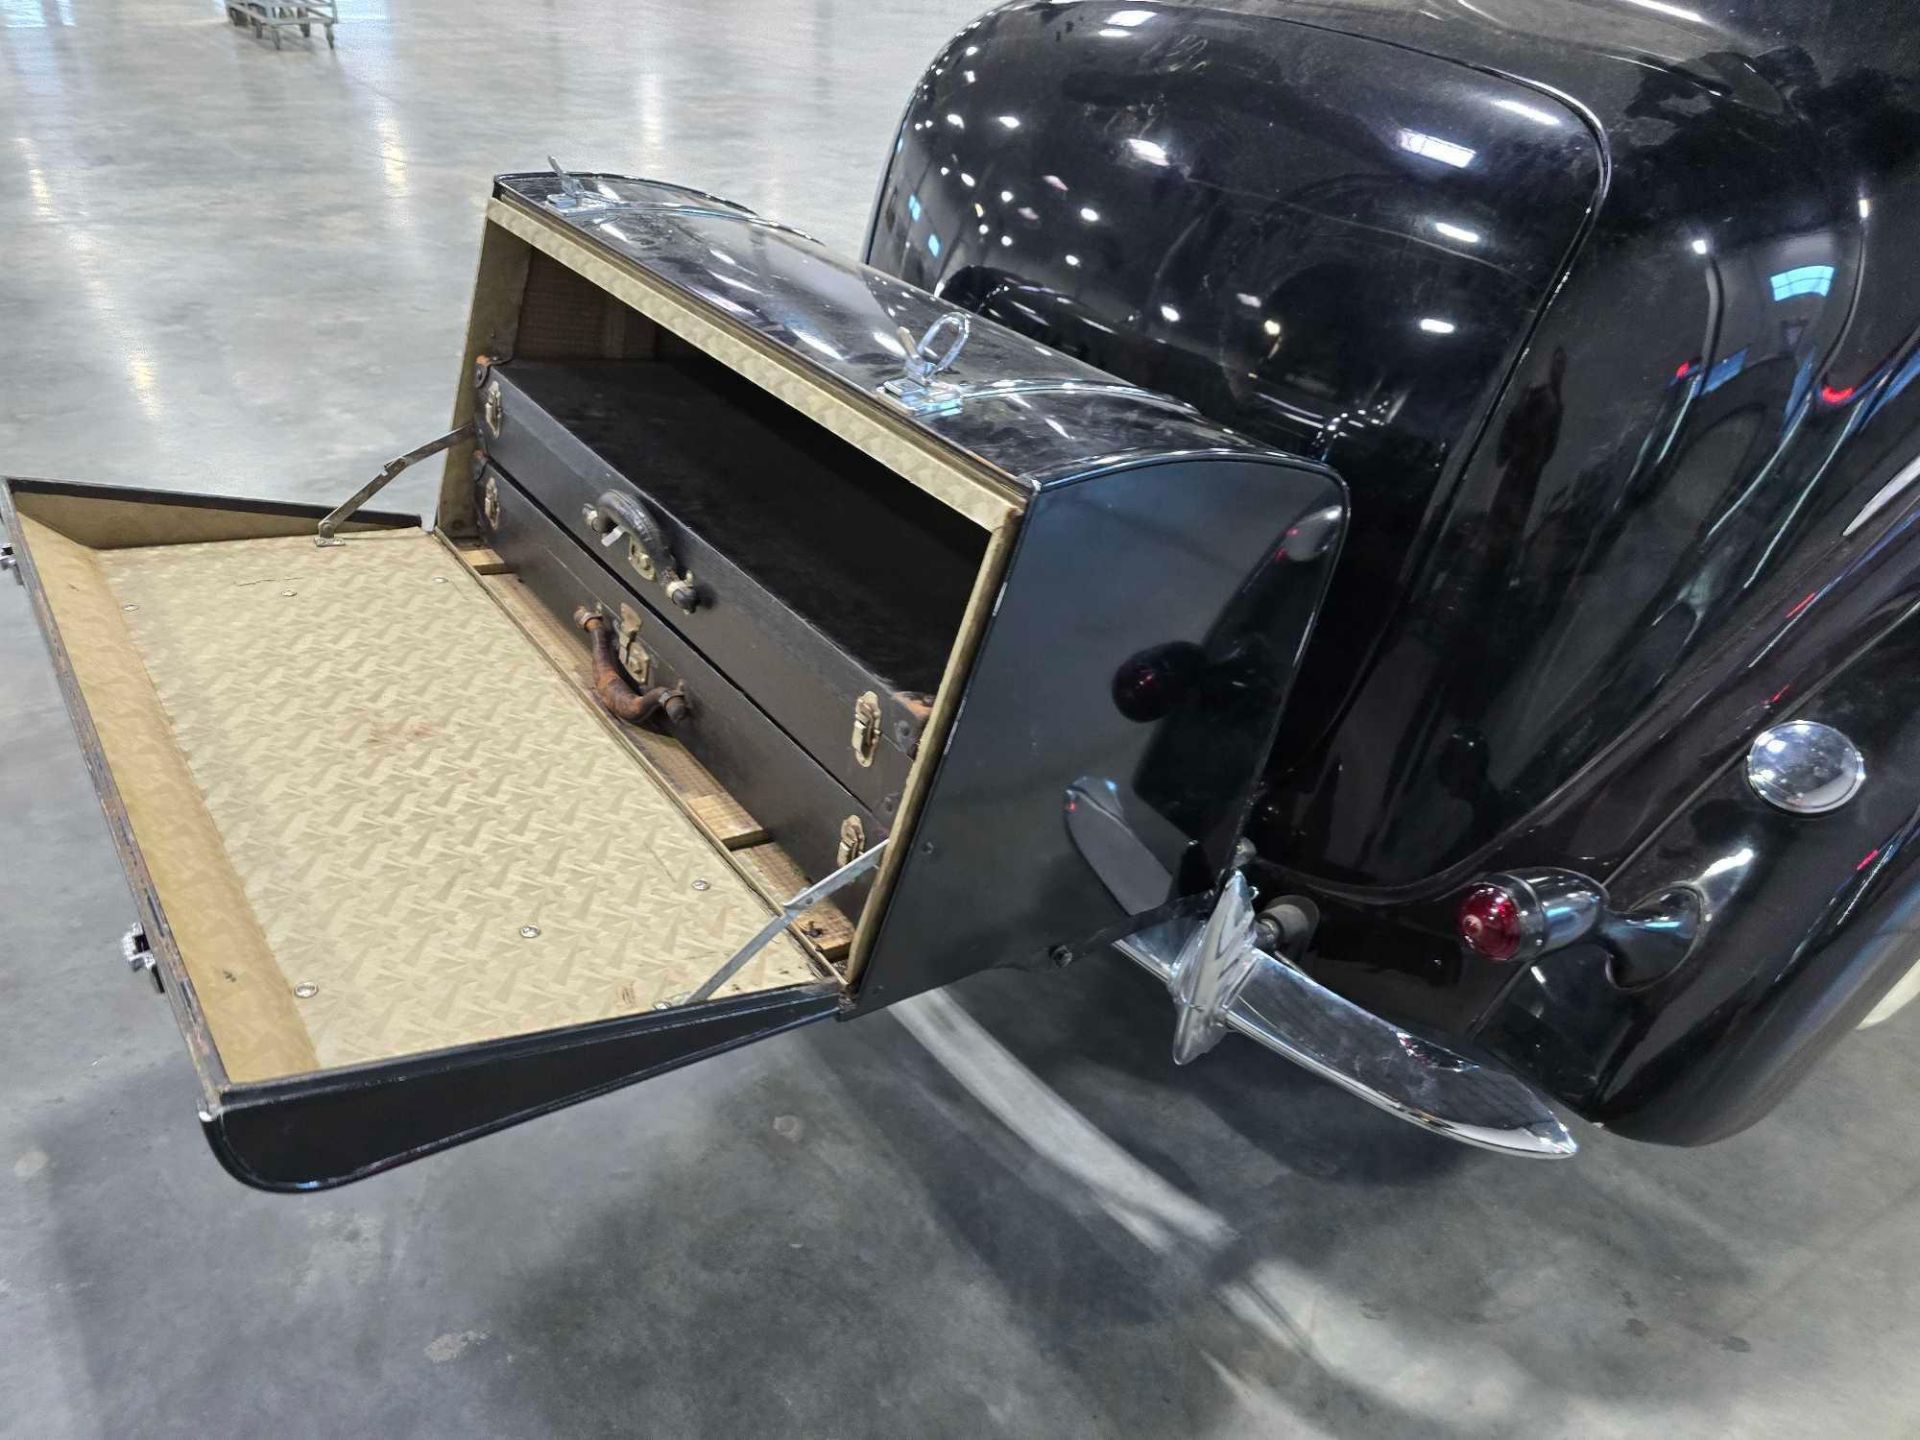 1938 Lincoln Model K v12 (last ran 4 years ago, we believe it needs new gas and a battery)  VIN #K91 - Image 8 of 37